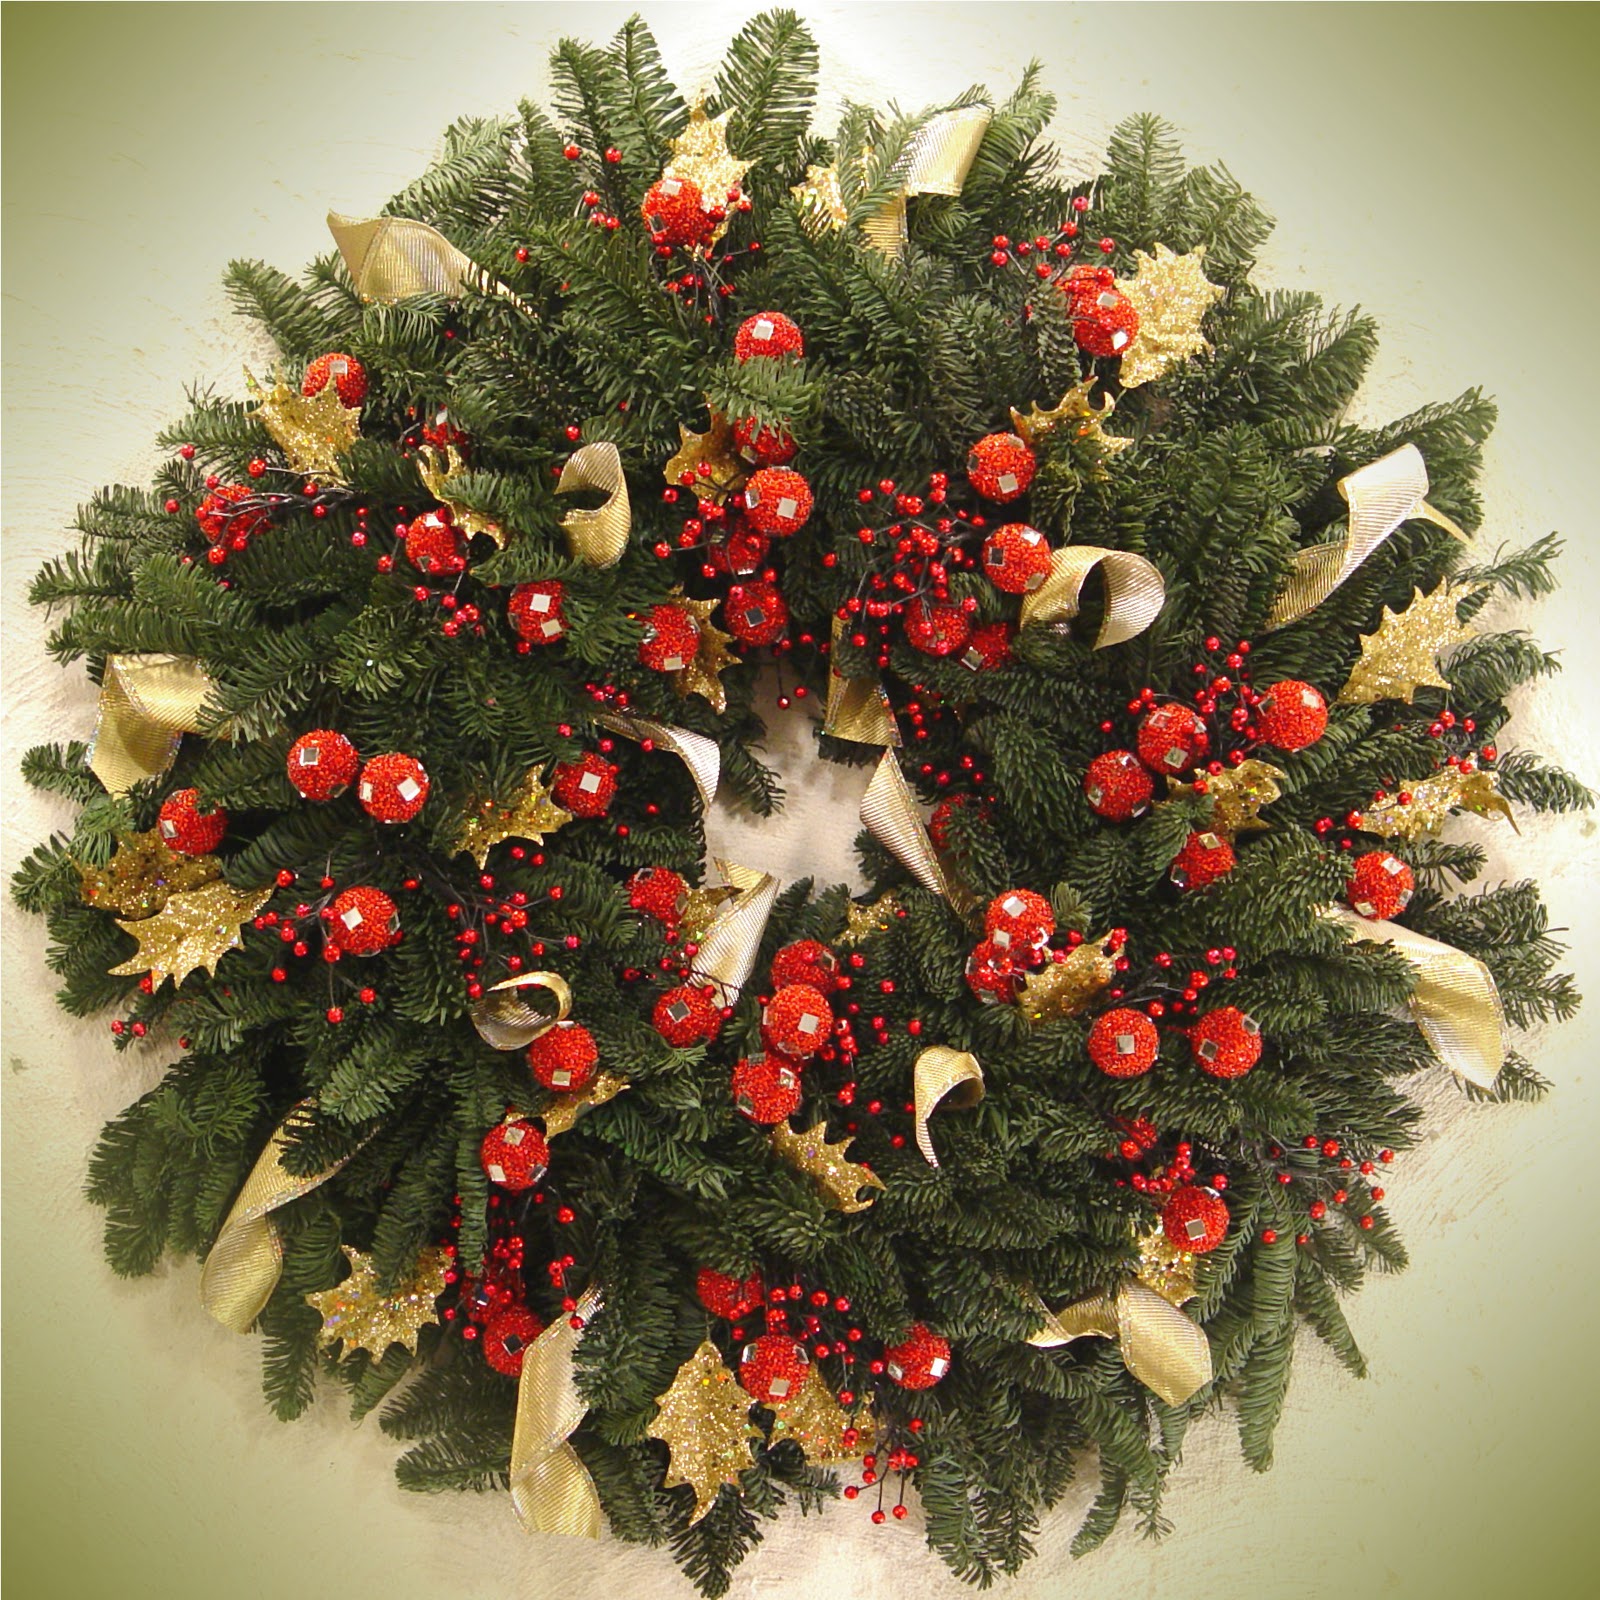 accessories-and-furniture-fresh-natural-theme-diy-christmas-front-door-wreath-design-ideas-with-fresh-evergreen-berries-cool-red-christmas-ornaments-and-lovely-glittering-gold-ribbons-simple-inspir